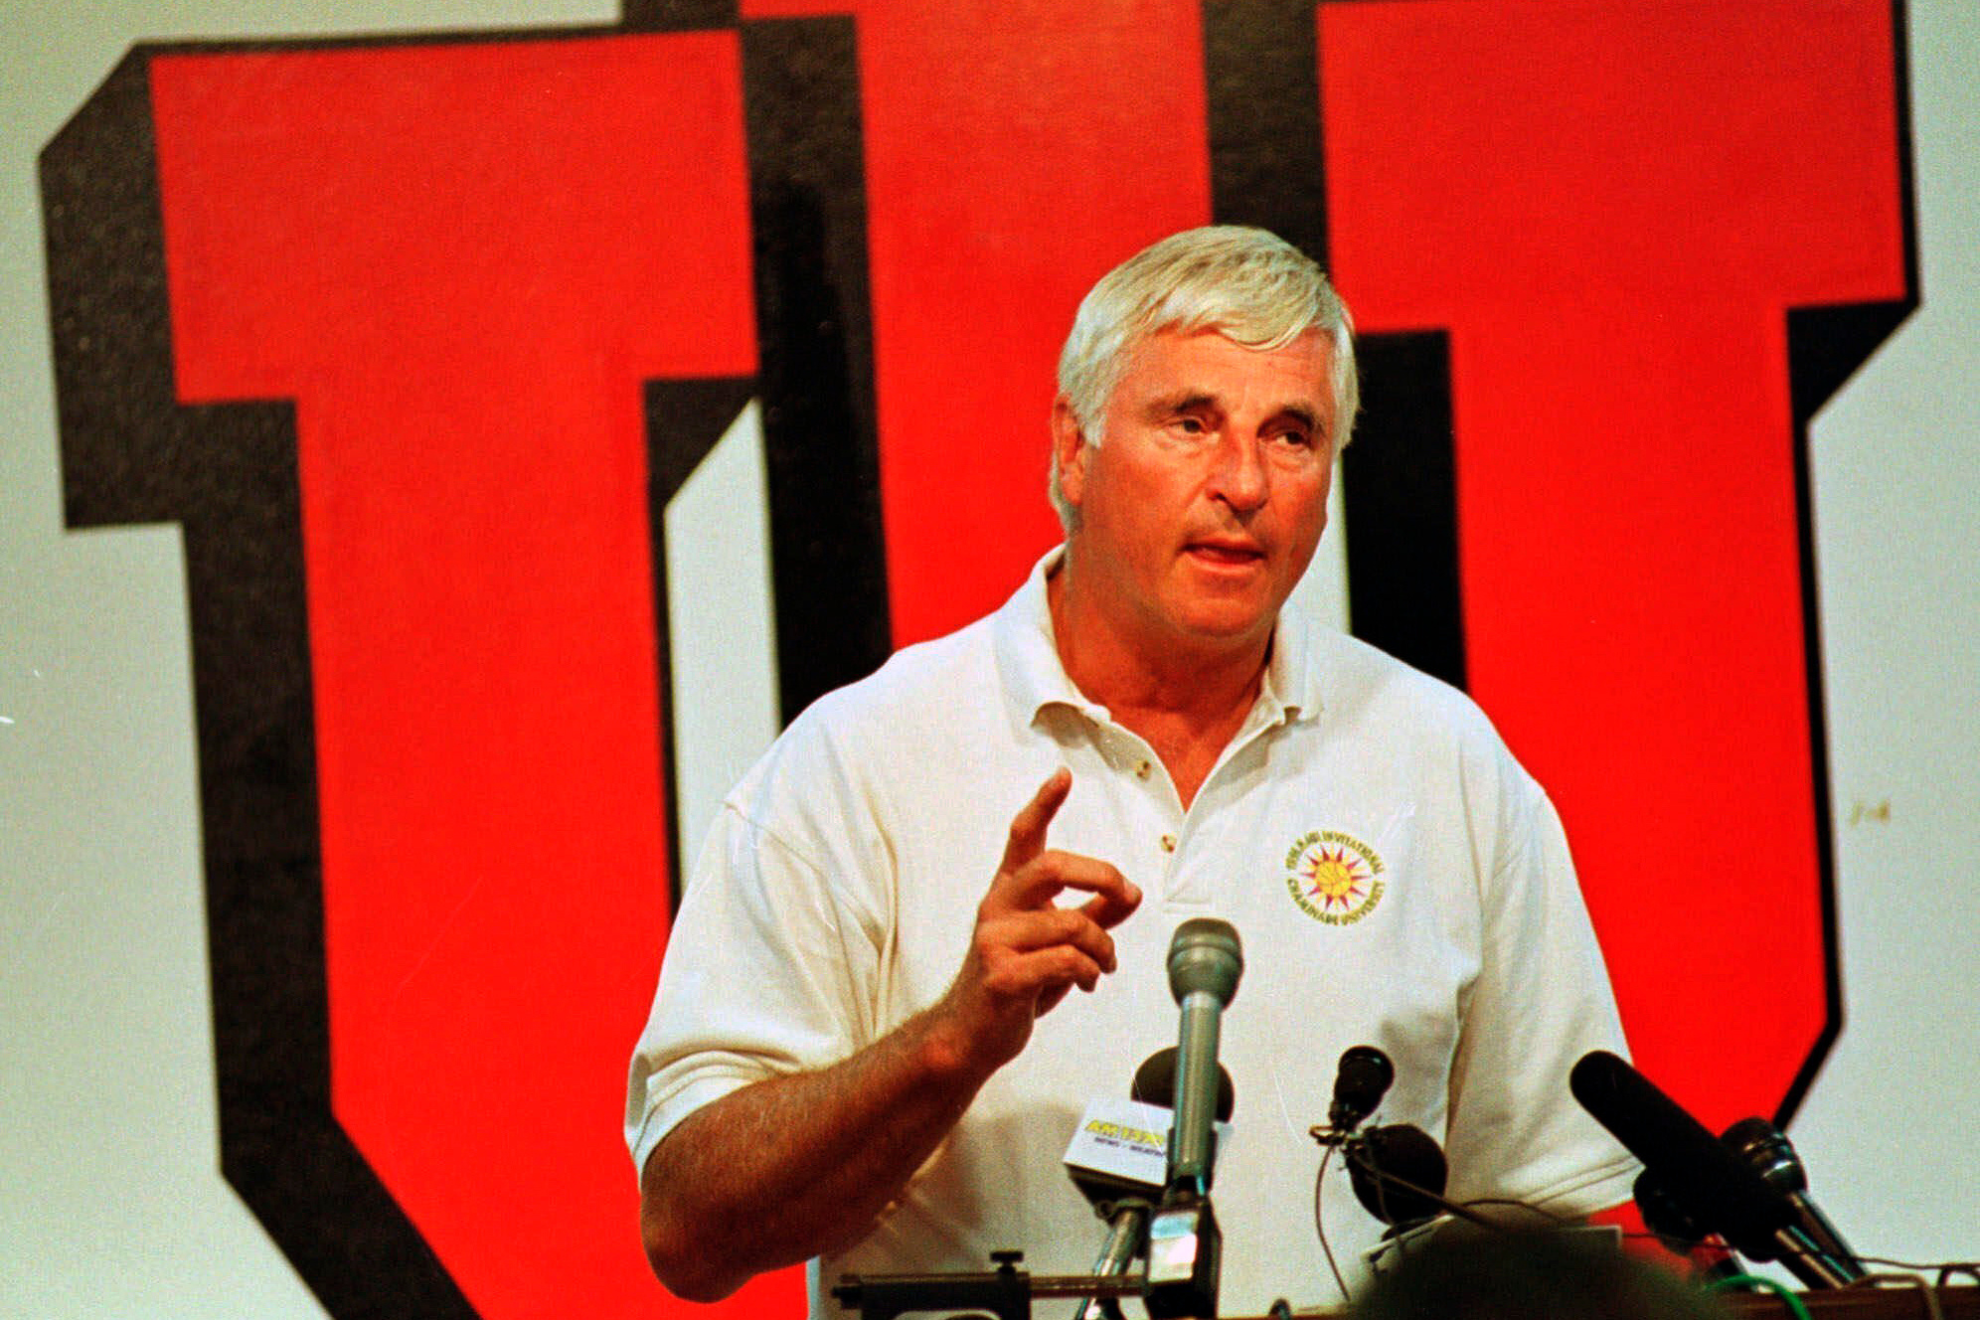 Bob Knight achieved massive success as head coach of the Indiana Hoosiers.